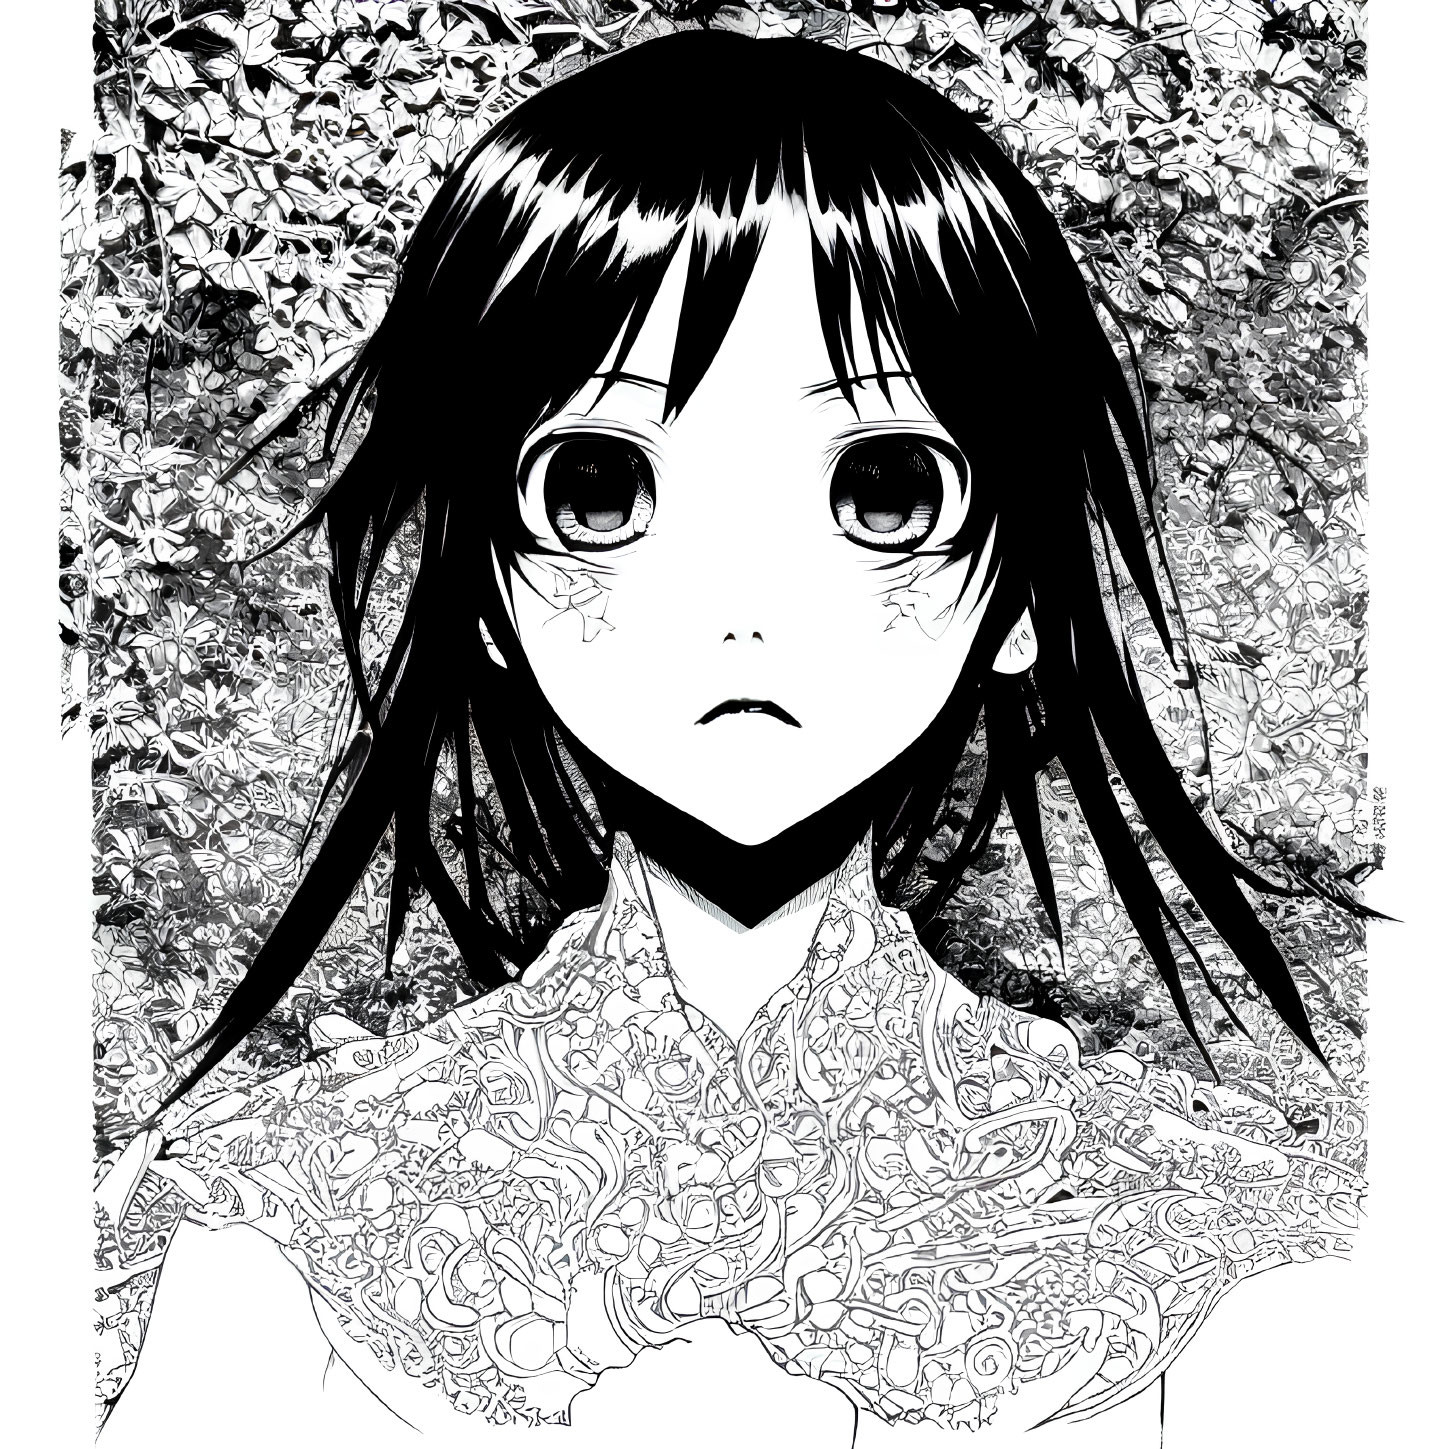 Detailed black and white illustration of a young girl with expressive eyes, long hair, and intricate lace collar